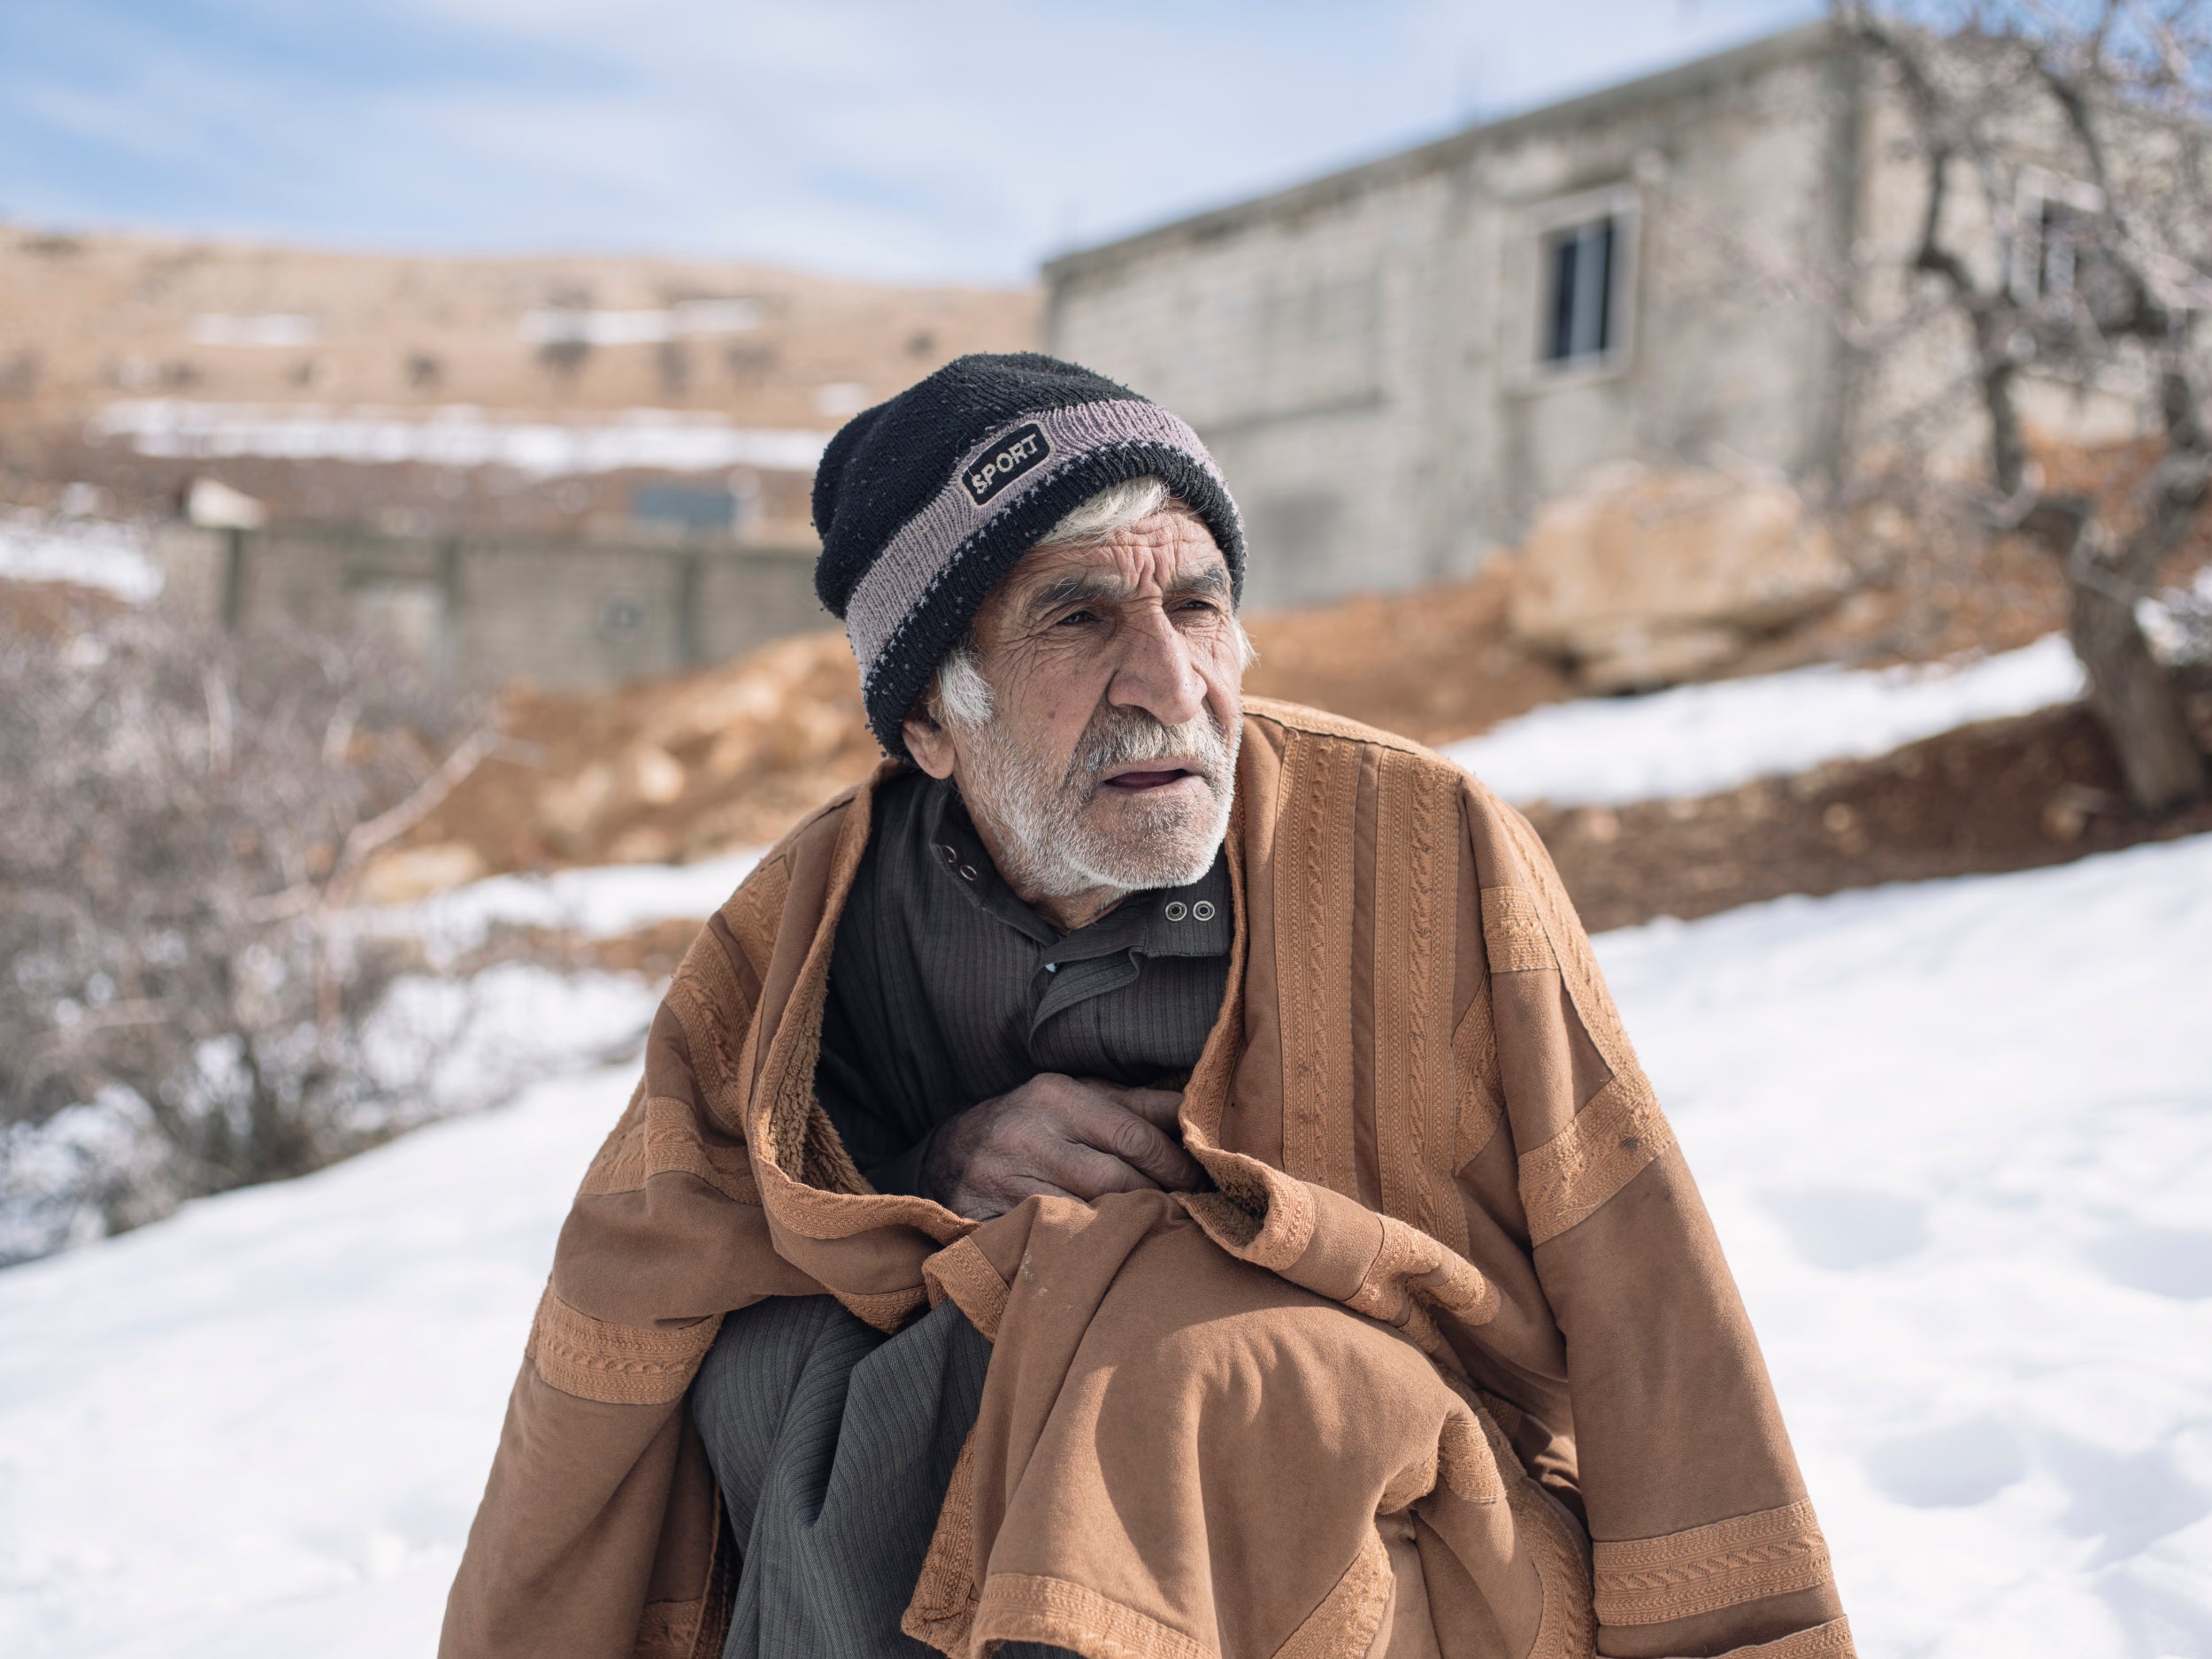 Ahmed, 66, packed up his life in Syria and fled with his family to Arsal in 2014